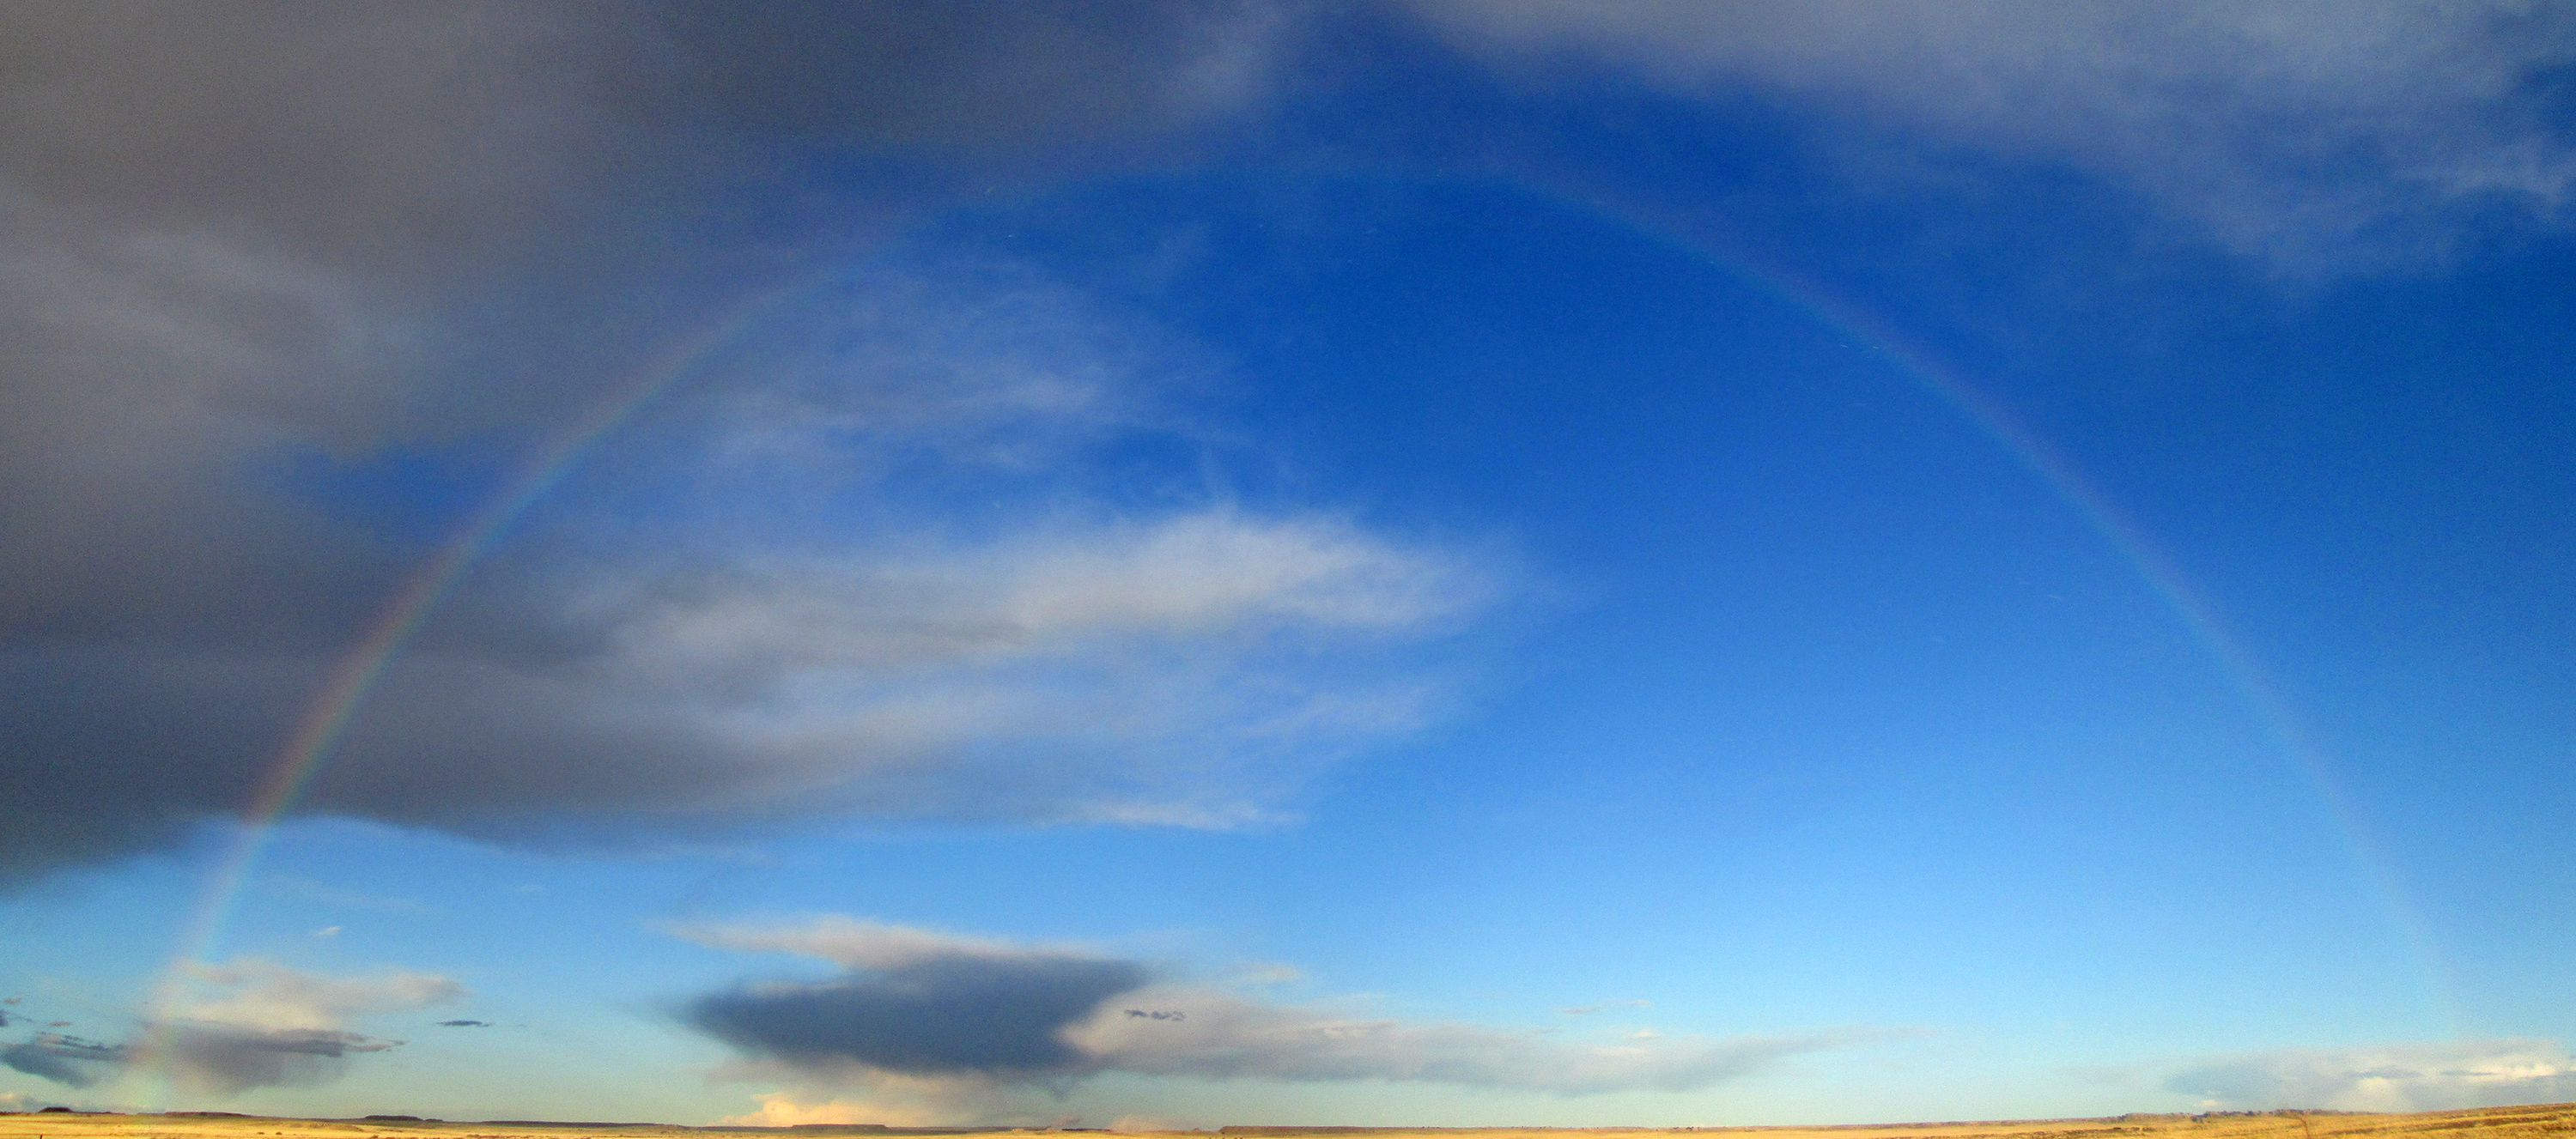 A full rainbow arches over the open grassland.